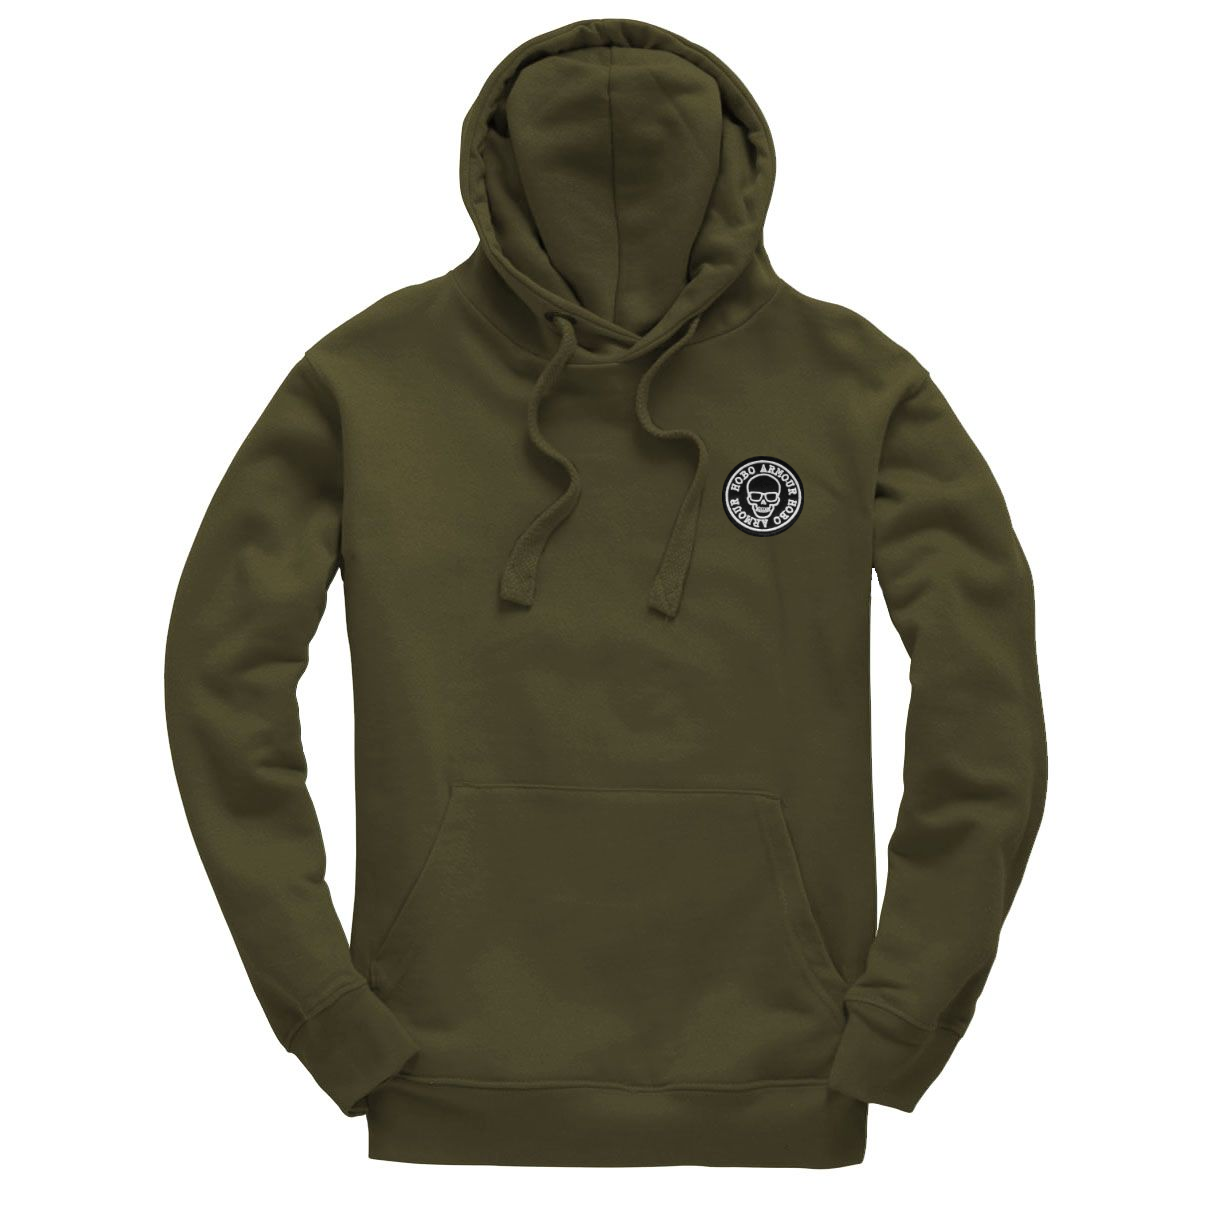 Olive Patched Stash Hoody